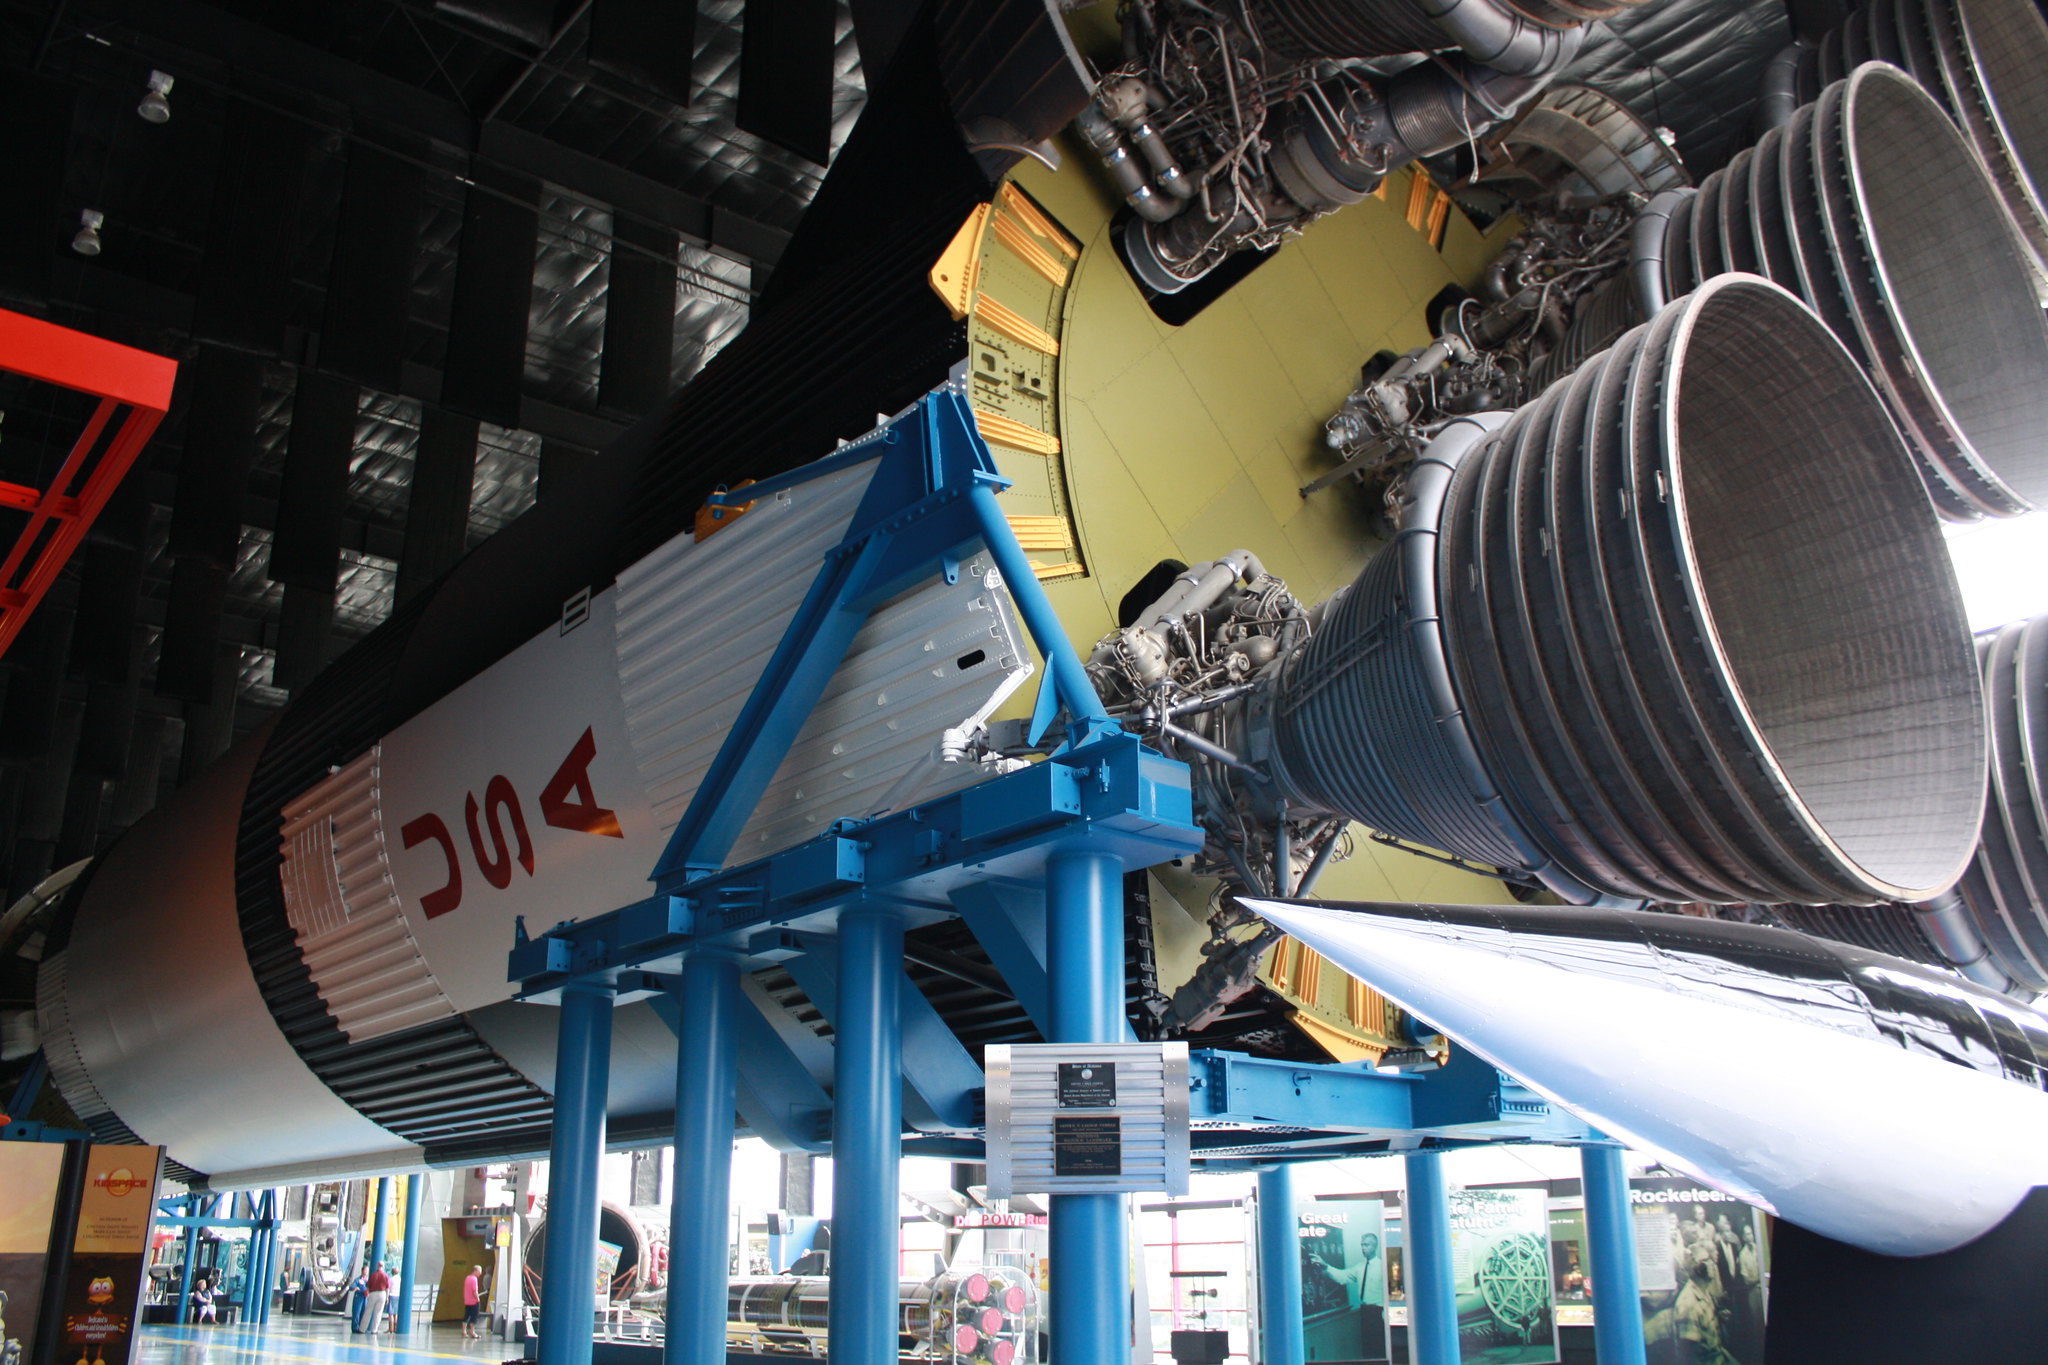 The massive Saturn V rocket on display is a popular draw to the Space Flight Center in Huntsville. Photo by Falon Yates.